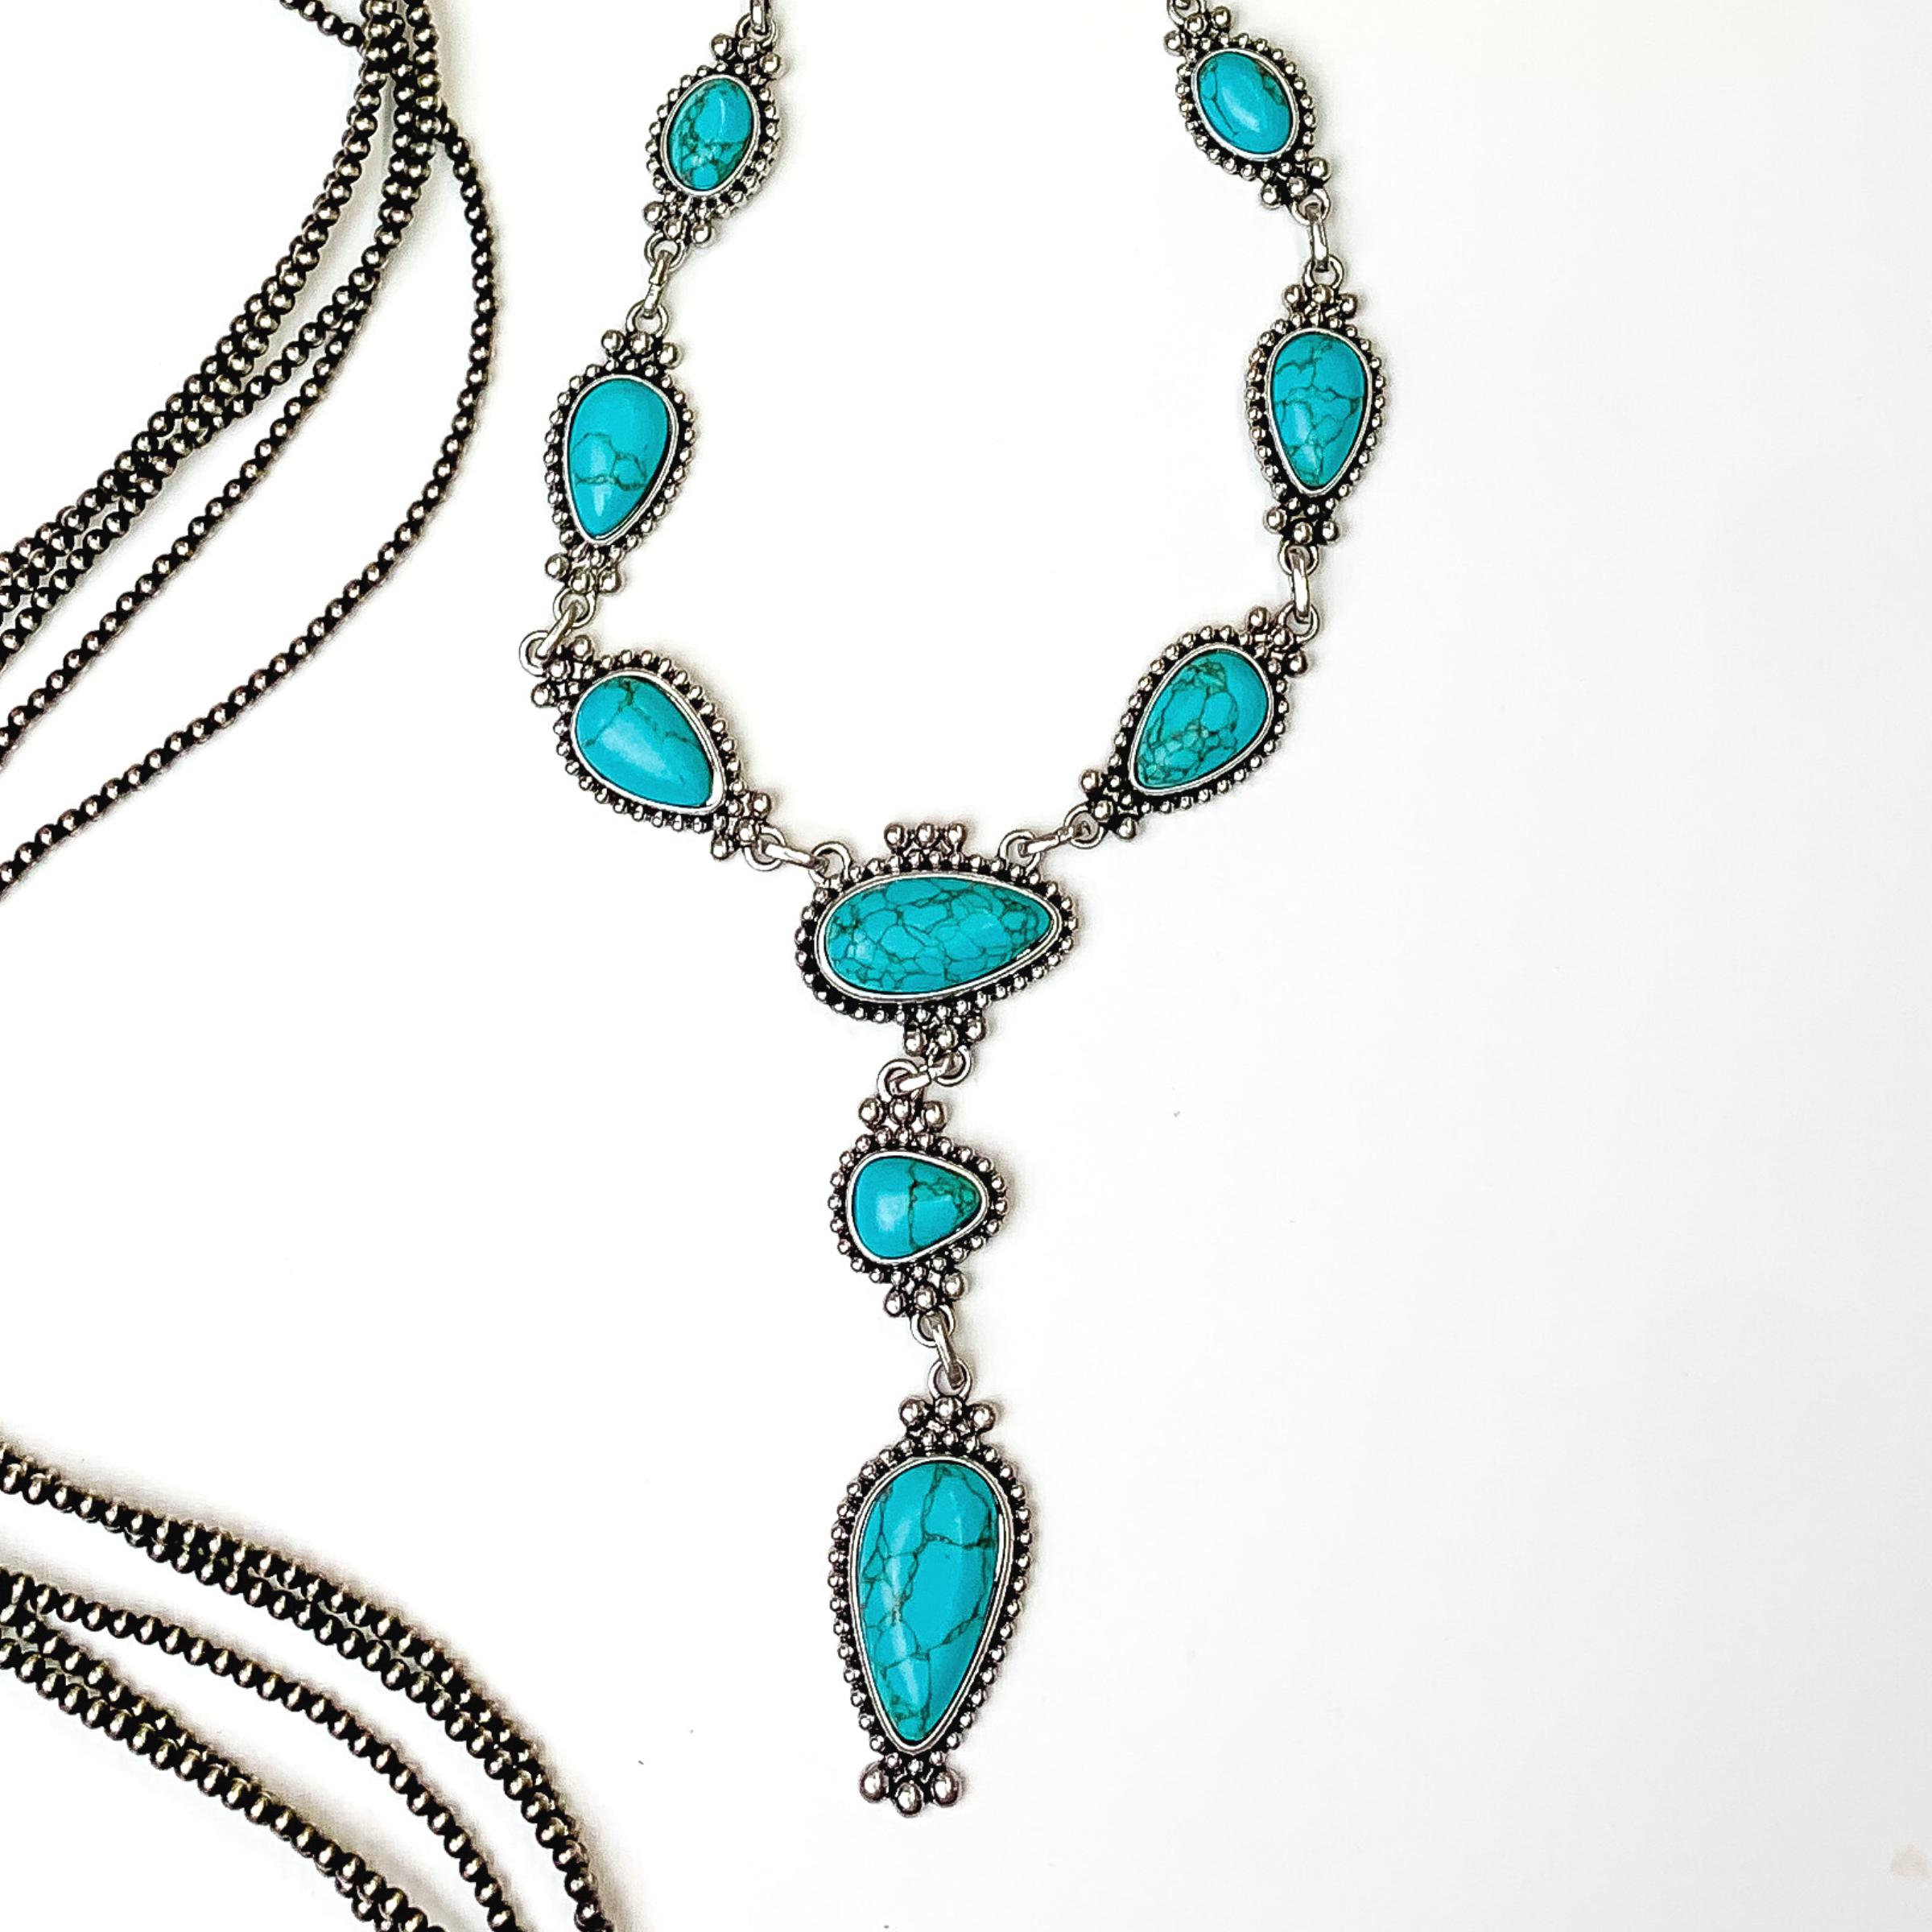 Silver lariat necklace with turquoise stones. Each stone has a silver beaded outline. This necklace is pictured on a white background with silver beads on the left side of the picture.